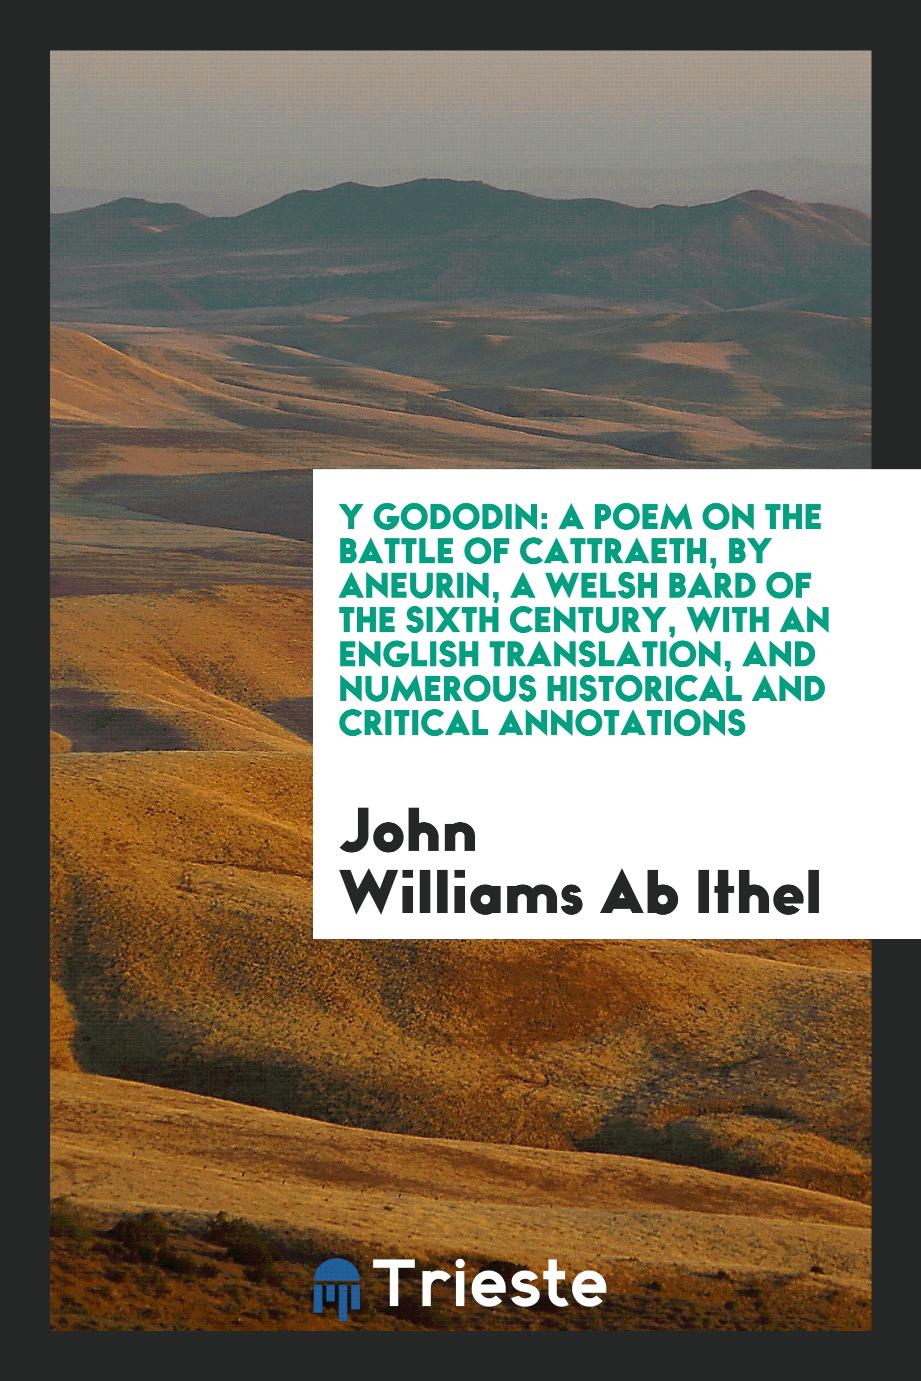 Y Gododin: A Poem on the Battle of Cattraeth, by Aneurin, a Welsh Bard of the Sixth Century, with an English Translation, and Numerous Historical and Critical Annotations